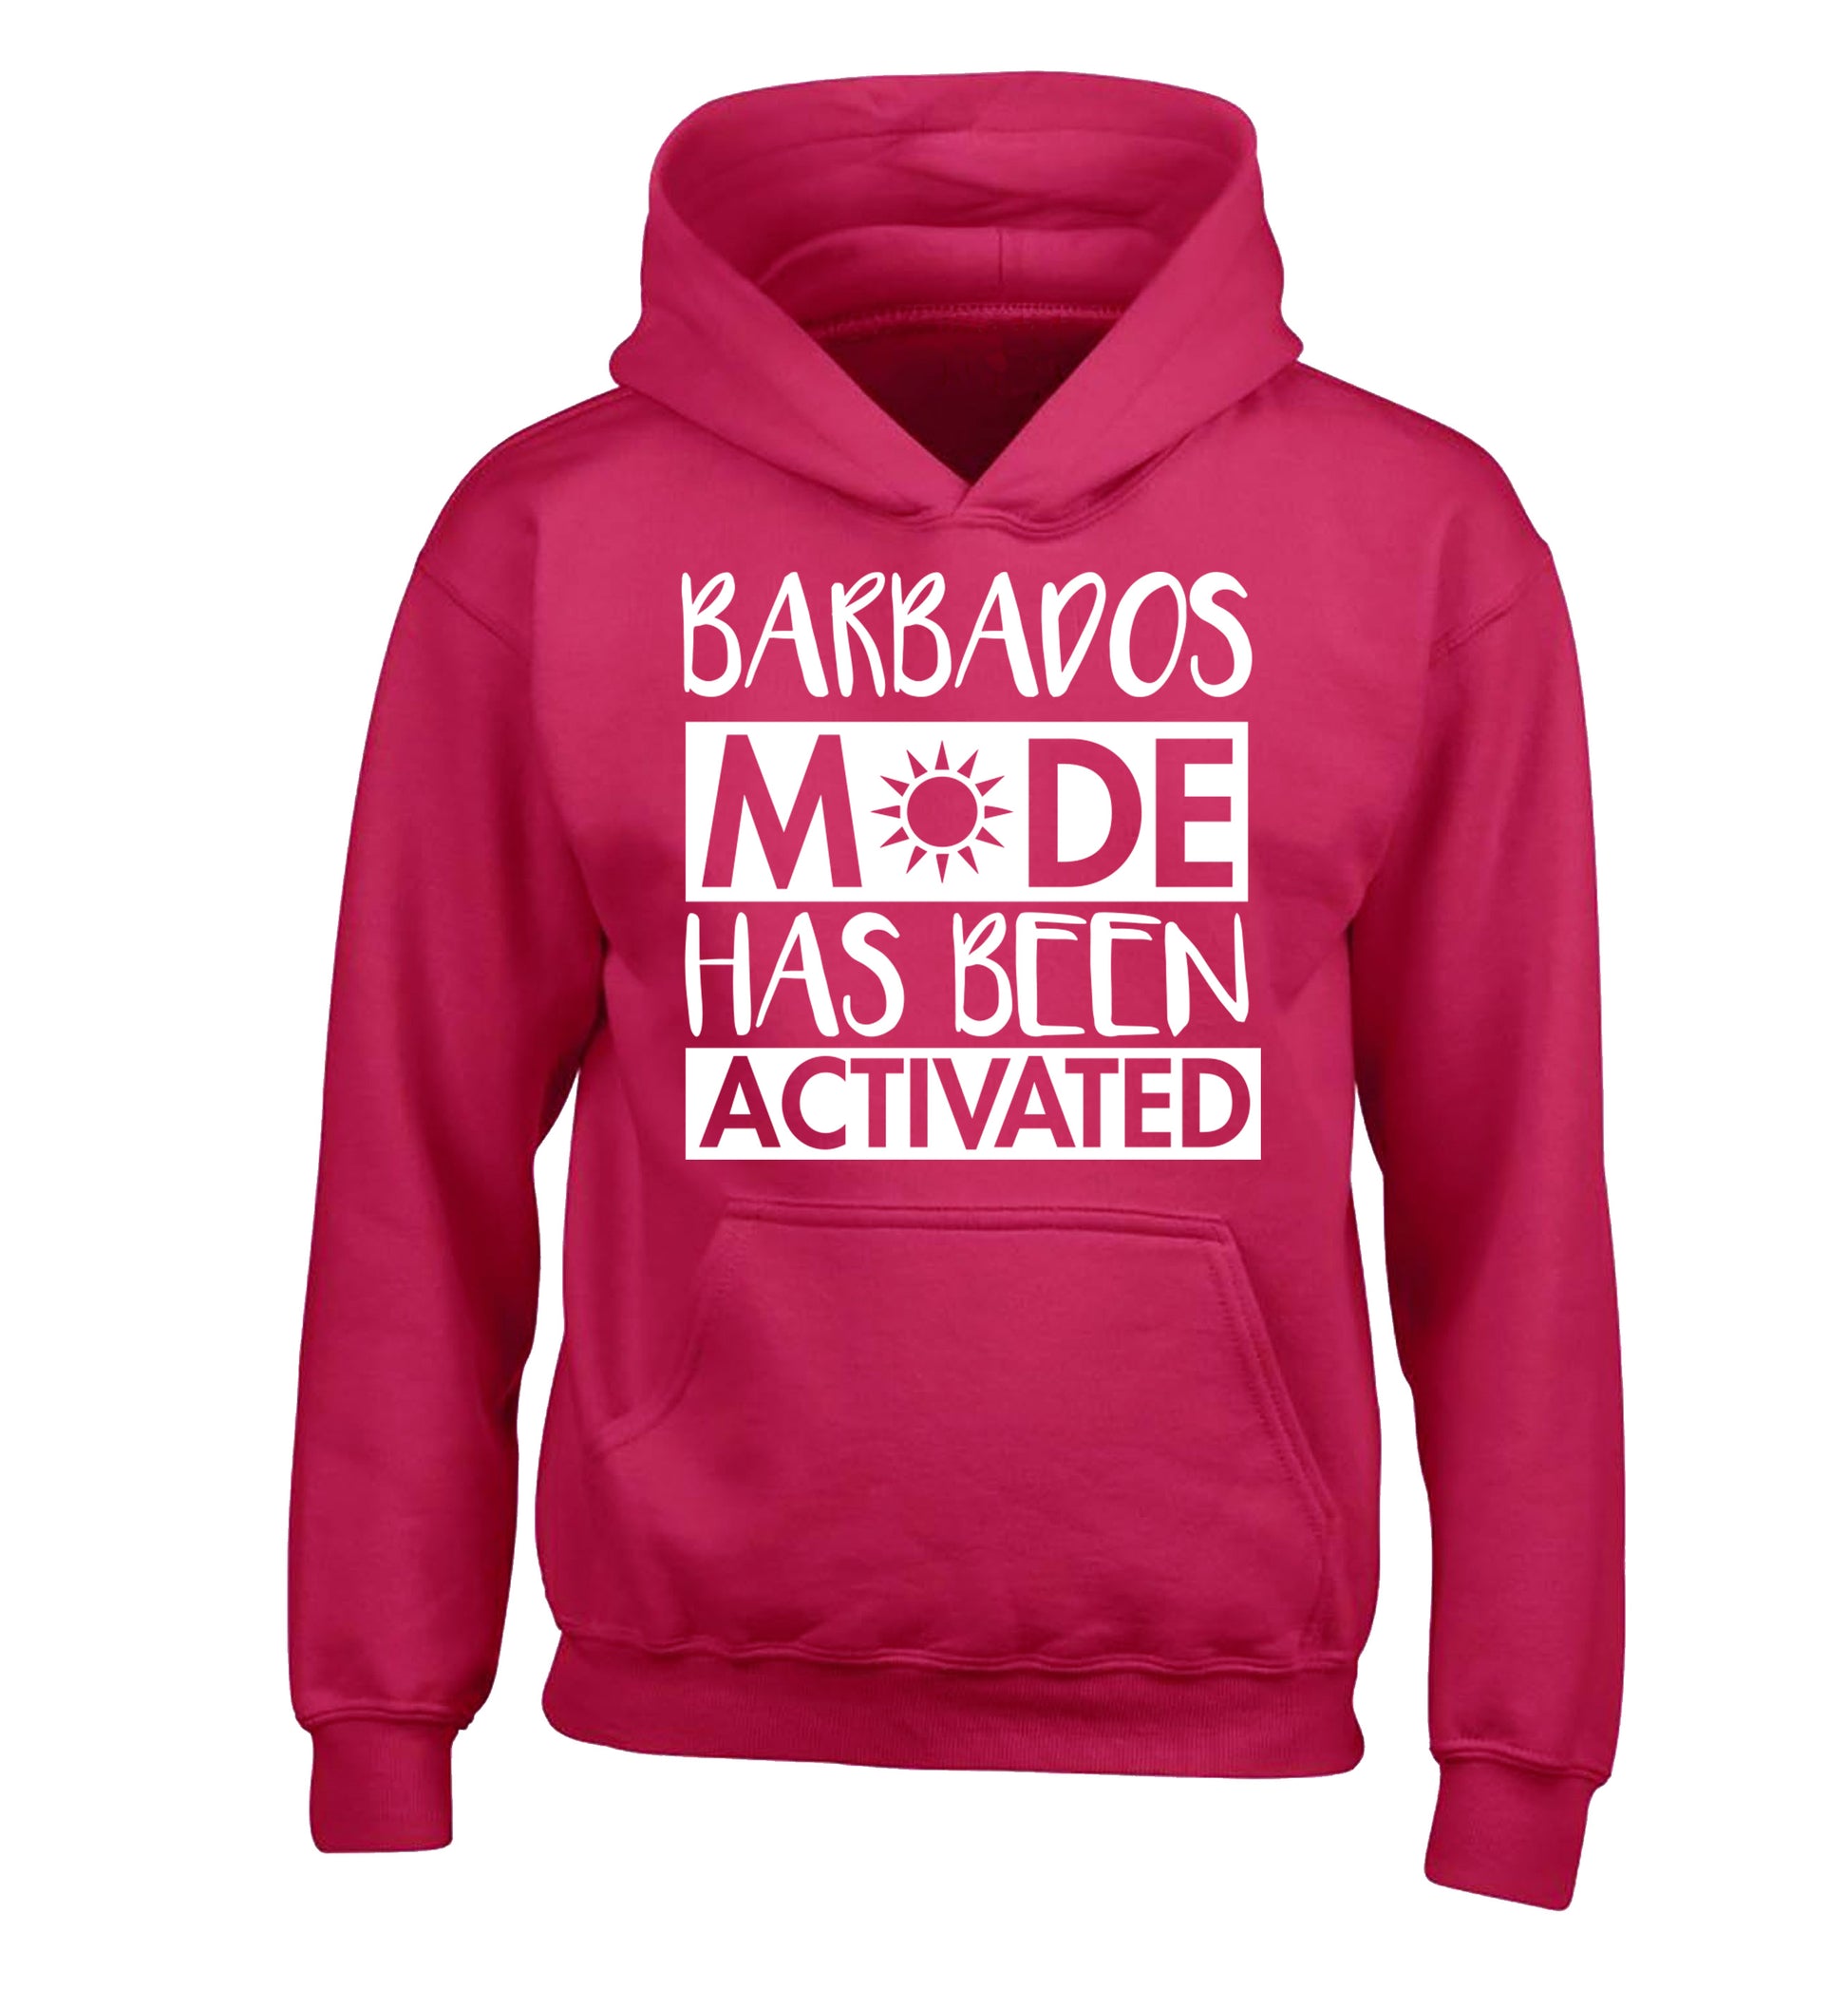 Barbados mode has been activated children's pink hoodie 12-13 Years